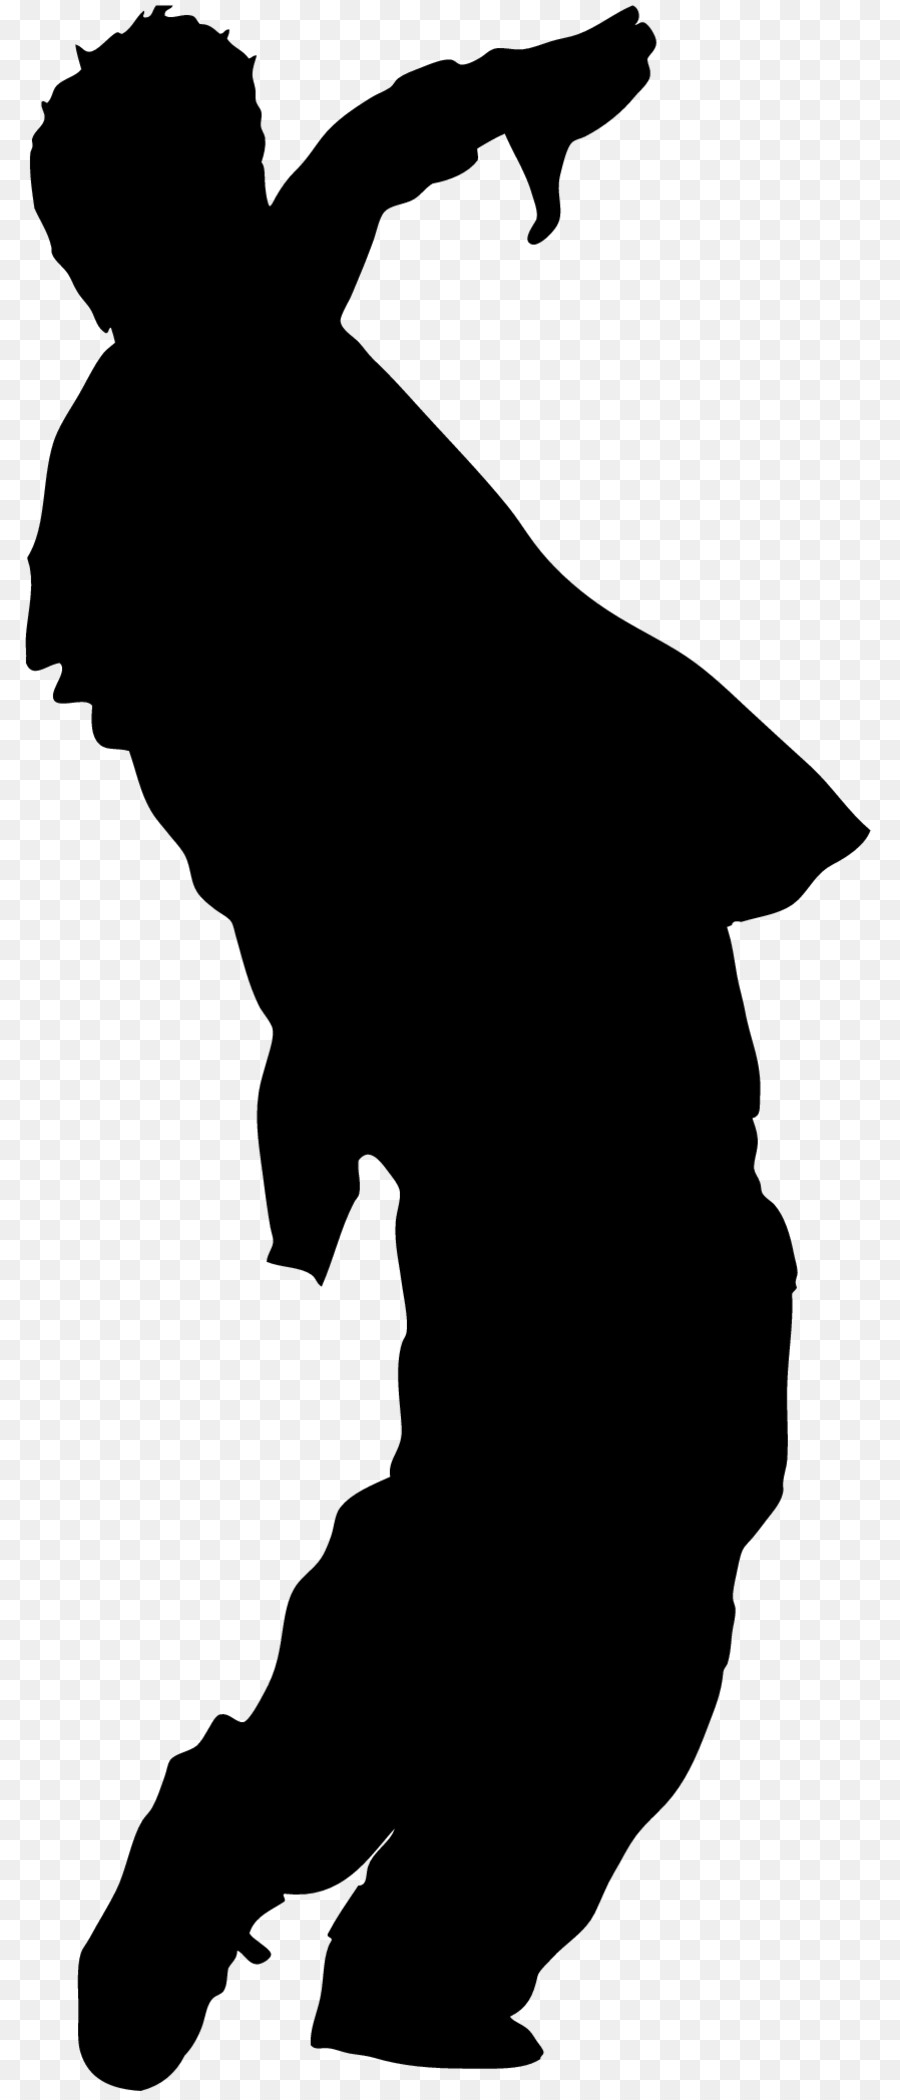 Silhouette Character White Fiction Clip art - man silhouette png download - 850*2091 - Free Transparent Silhouette png Download.